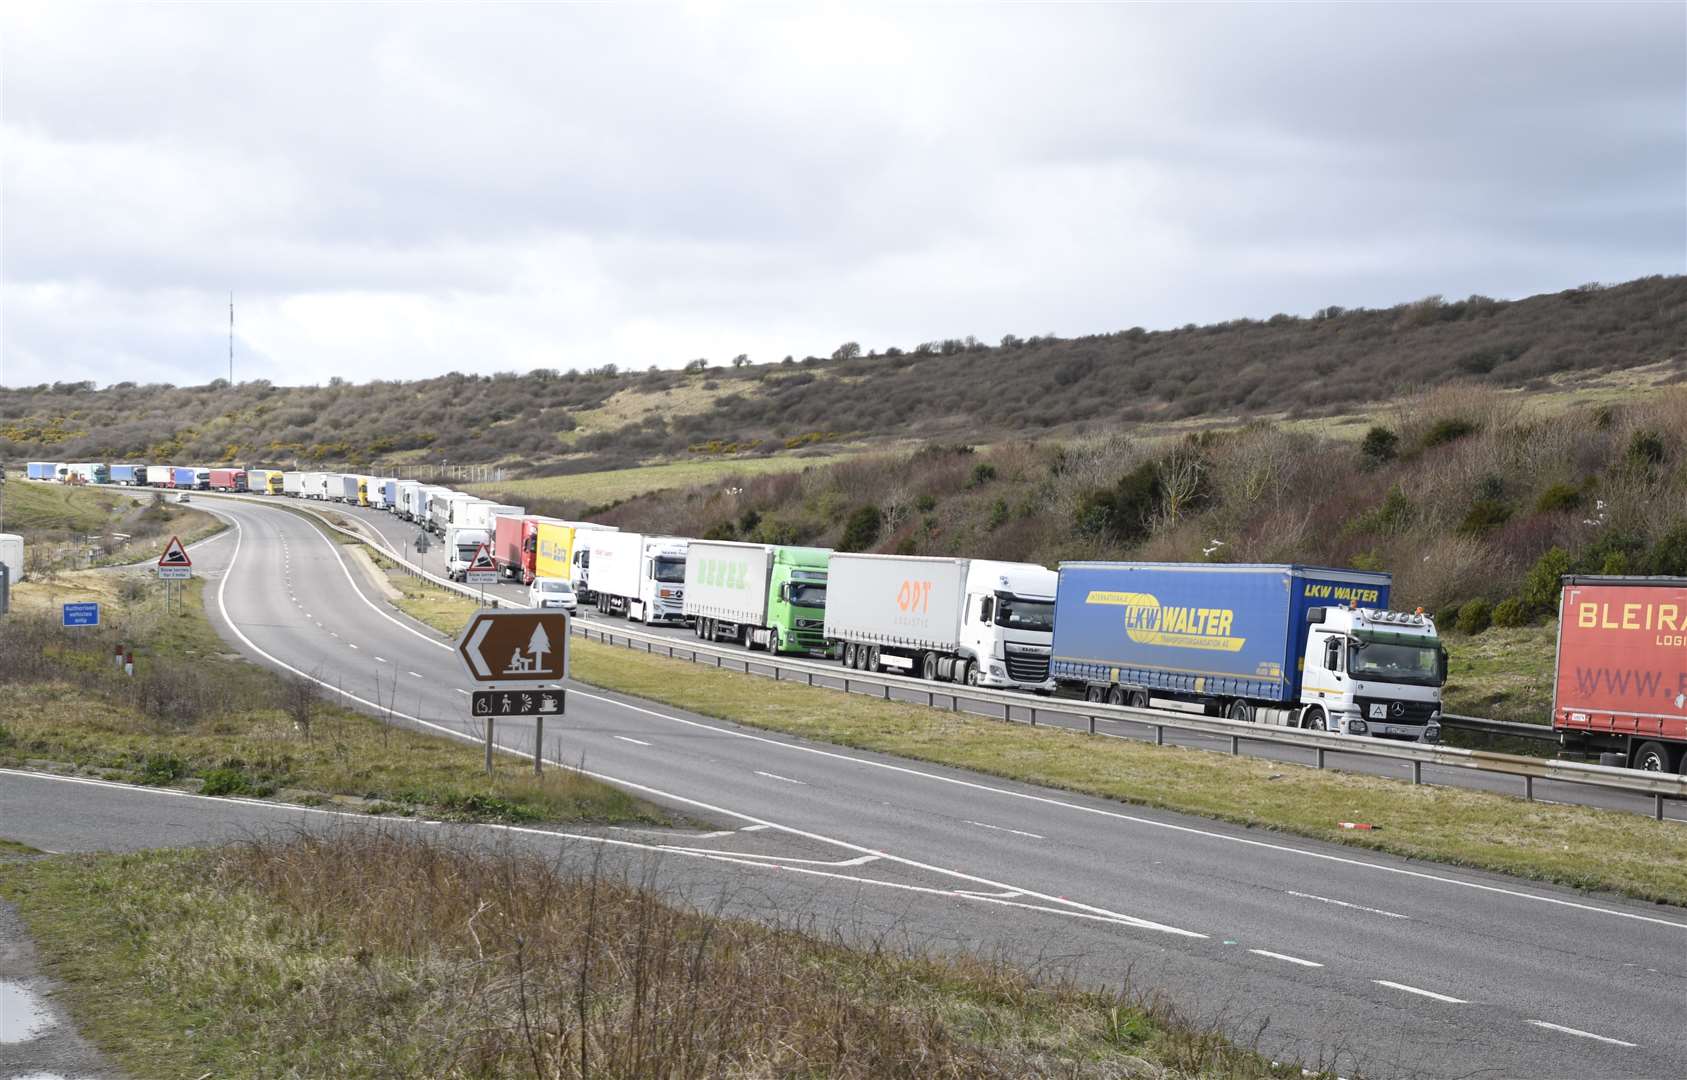 A no-deal Brexit could lead to 93-mile tailbacks, says the government